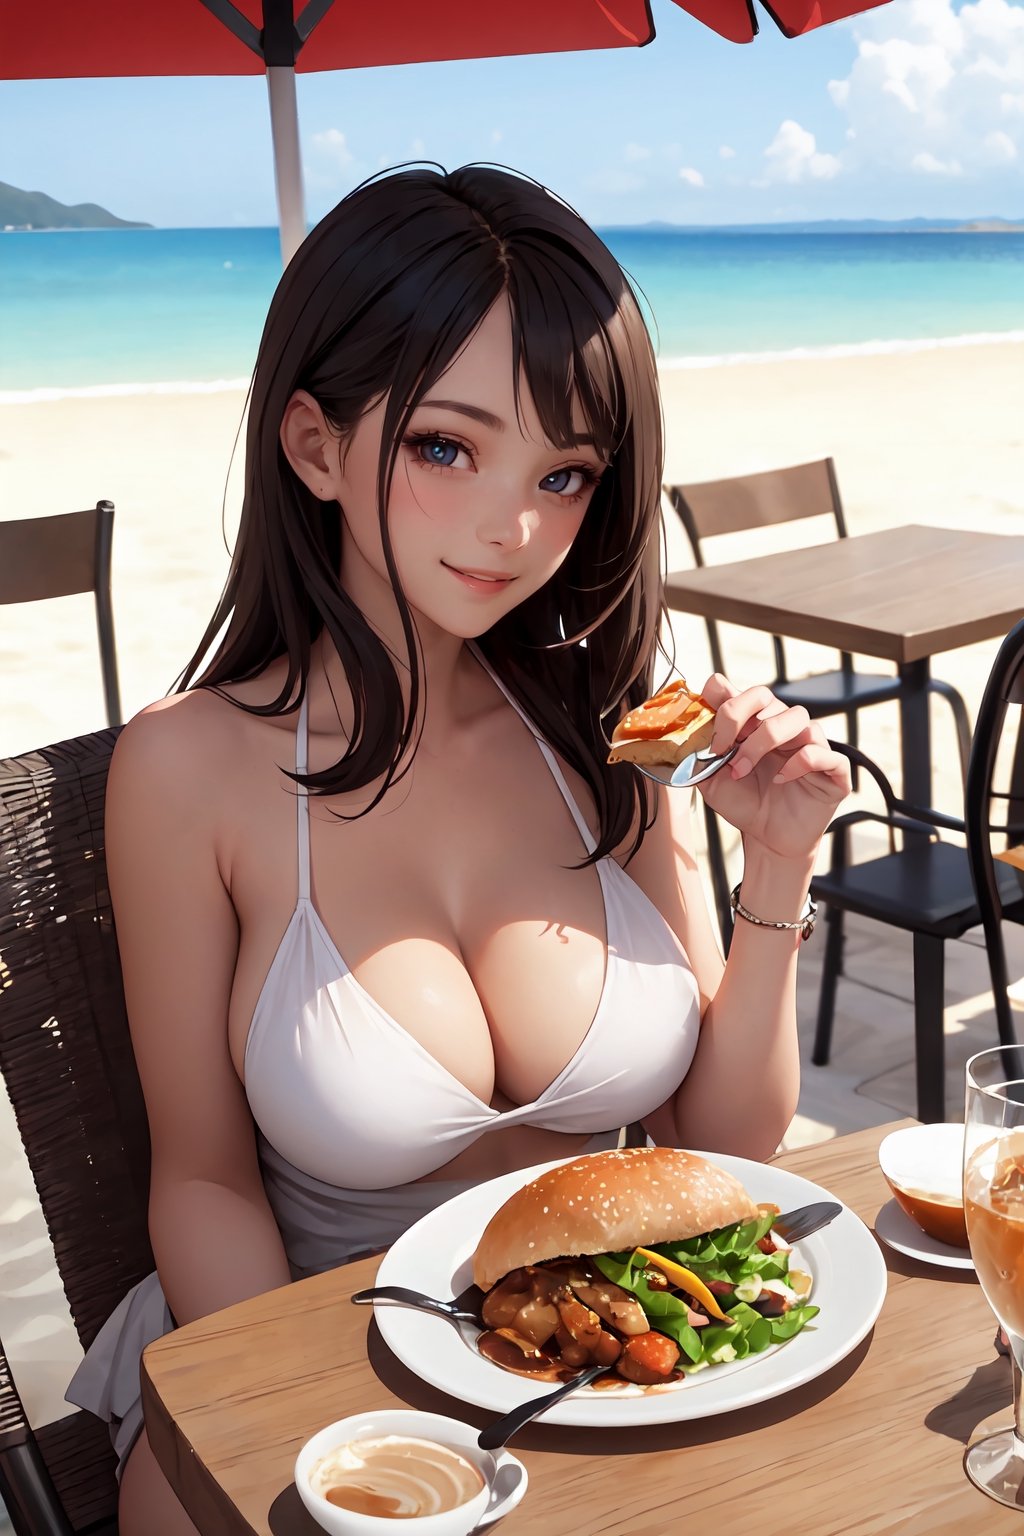 A perfectly beautiful woman, having lunch on a cafe terrace on the beach overlooking the sea.